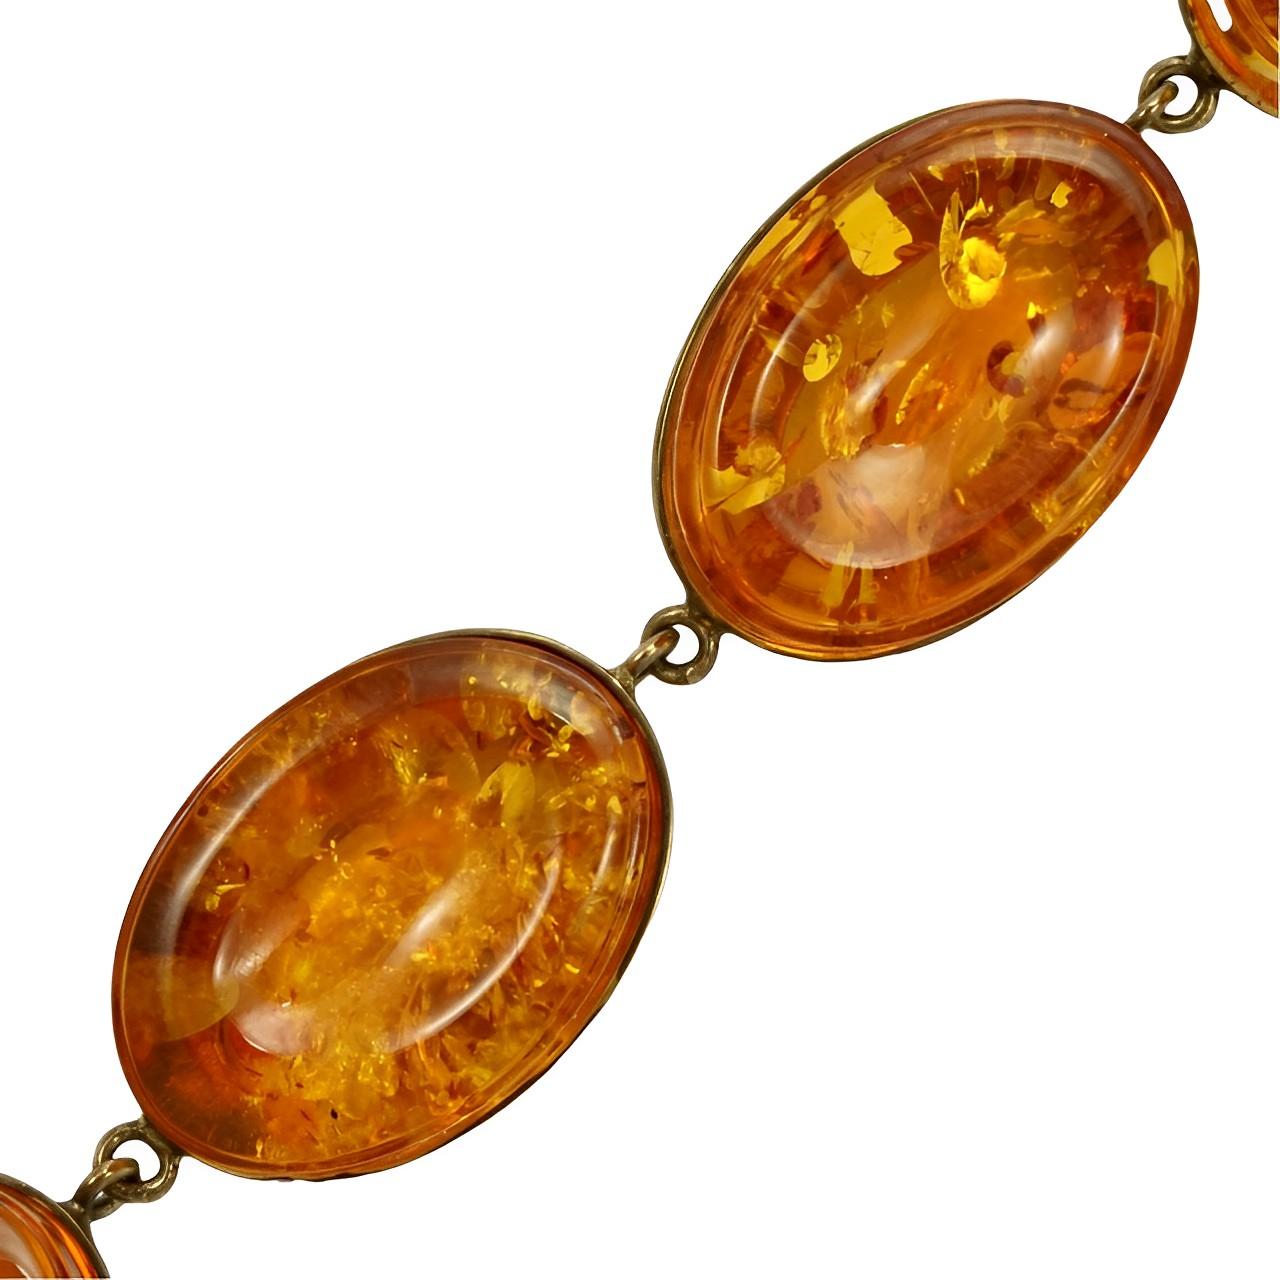 Beautiful gold vermeil on sterling silver link bracelet, set with oval amber stones.

The bracelet is stamped with a lion, a leopard's head and the The Millennium mark which is the number 2000 within a square cross. This means that the bracelet is